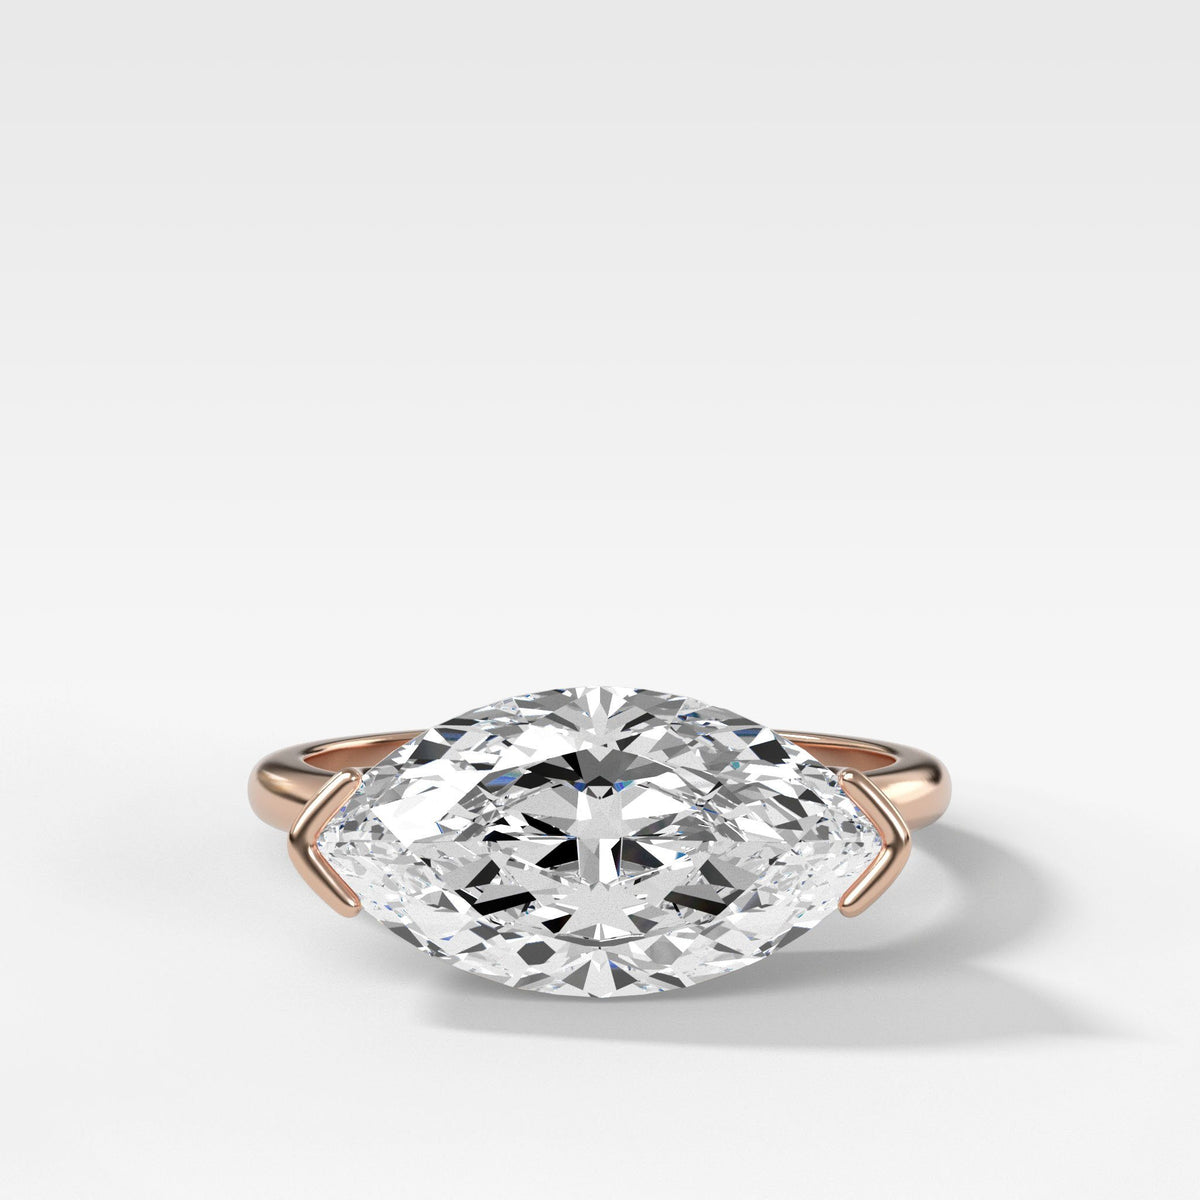 East West Half Bezel Solitaire Engagement Ring With Marquise Cut by Good Stone in Rose Gold